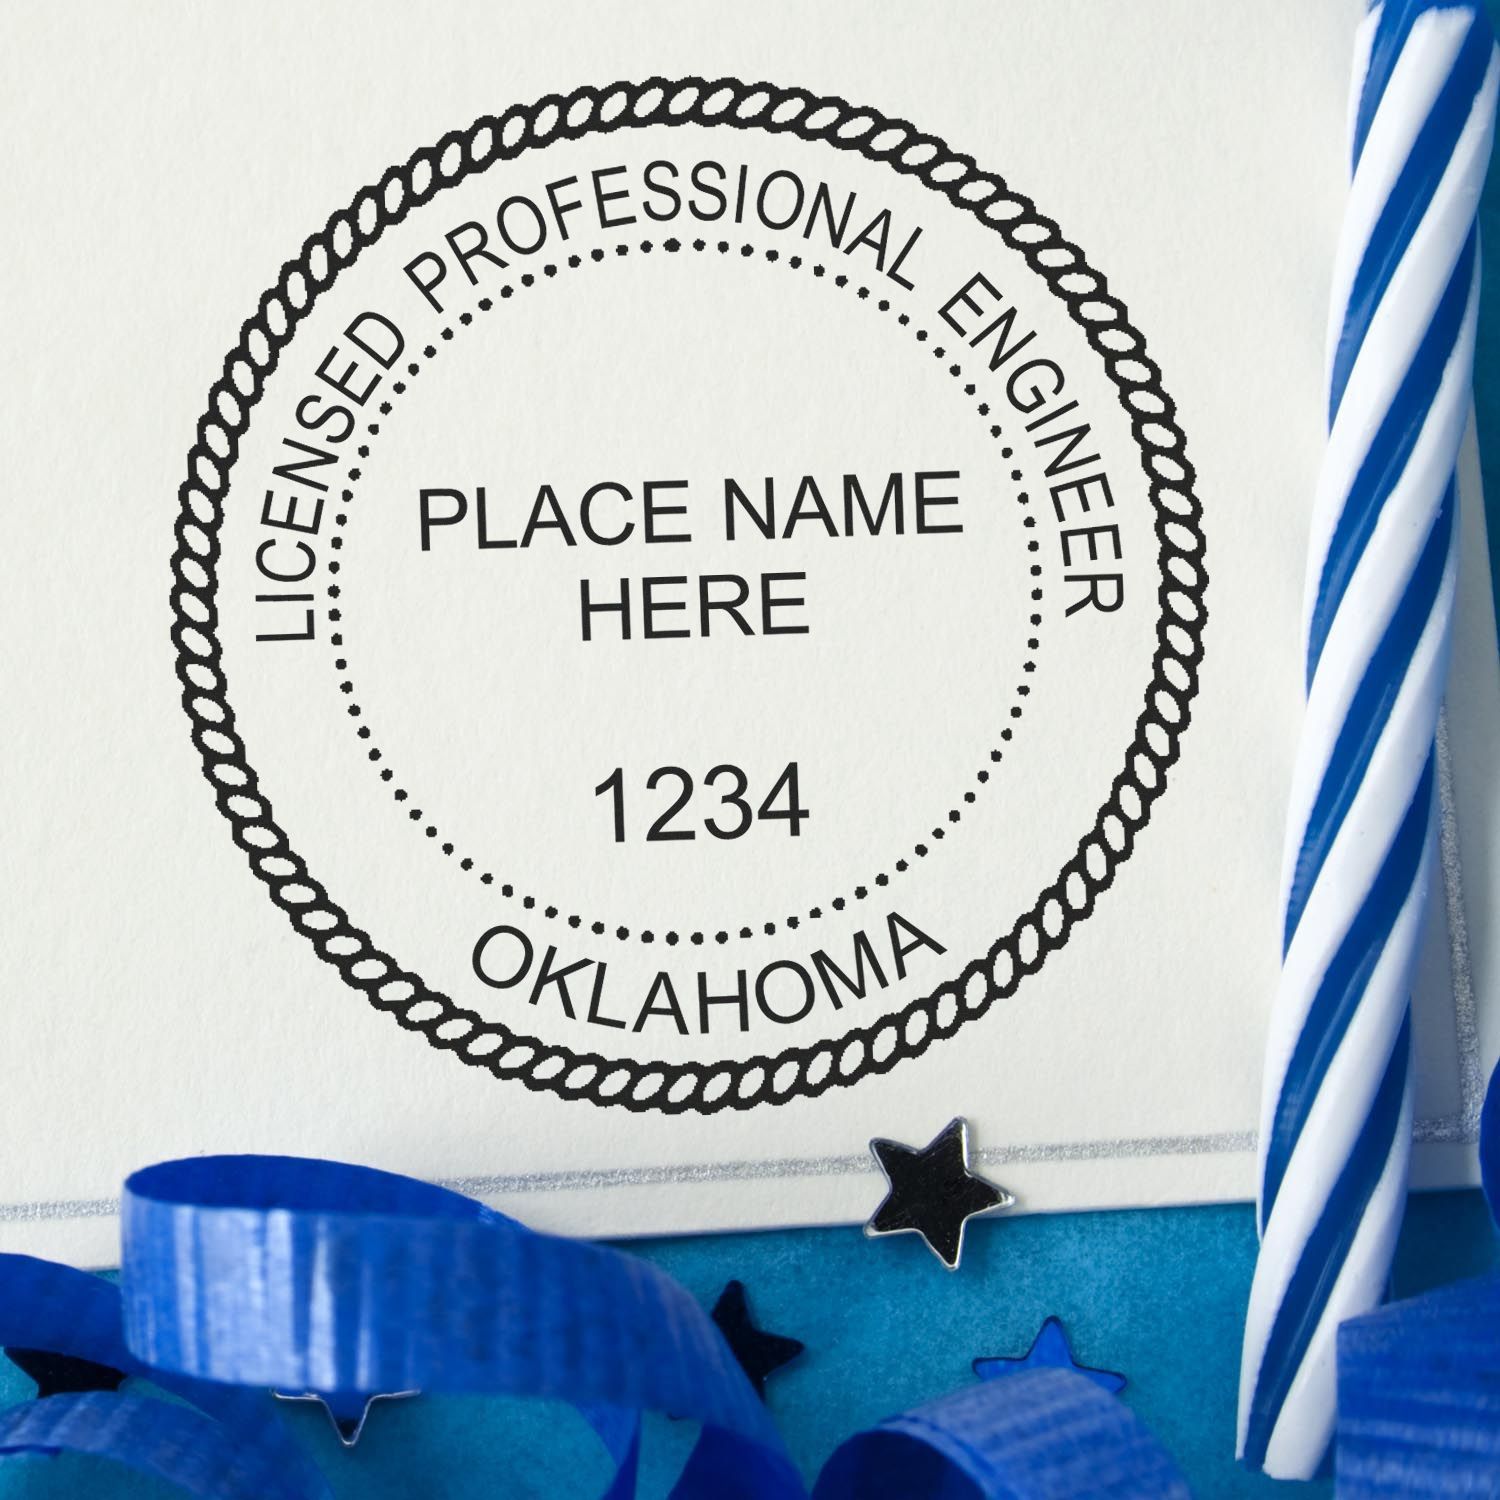 A lifestyle photo showing a stamped image of the Oklahoma Professional Engineer Seal Stamp on a piece of paper